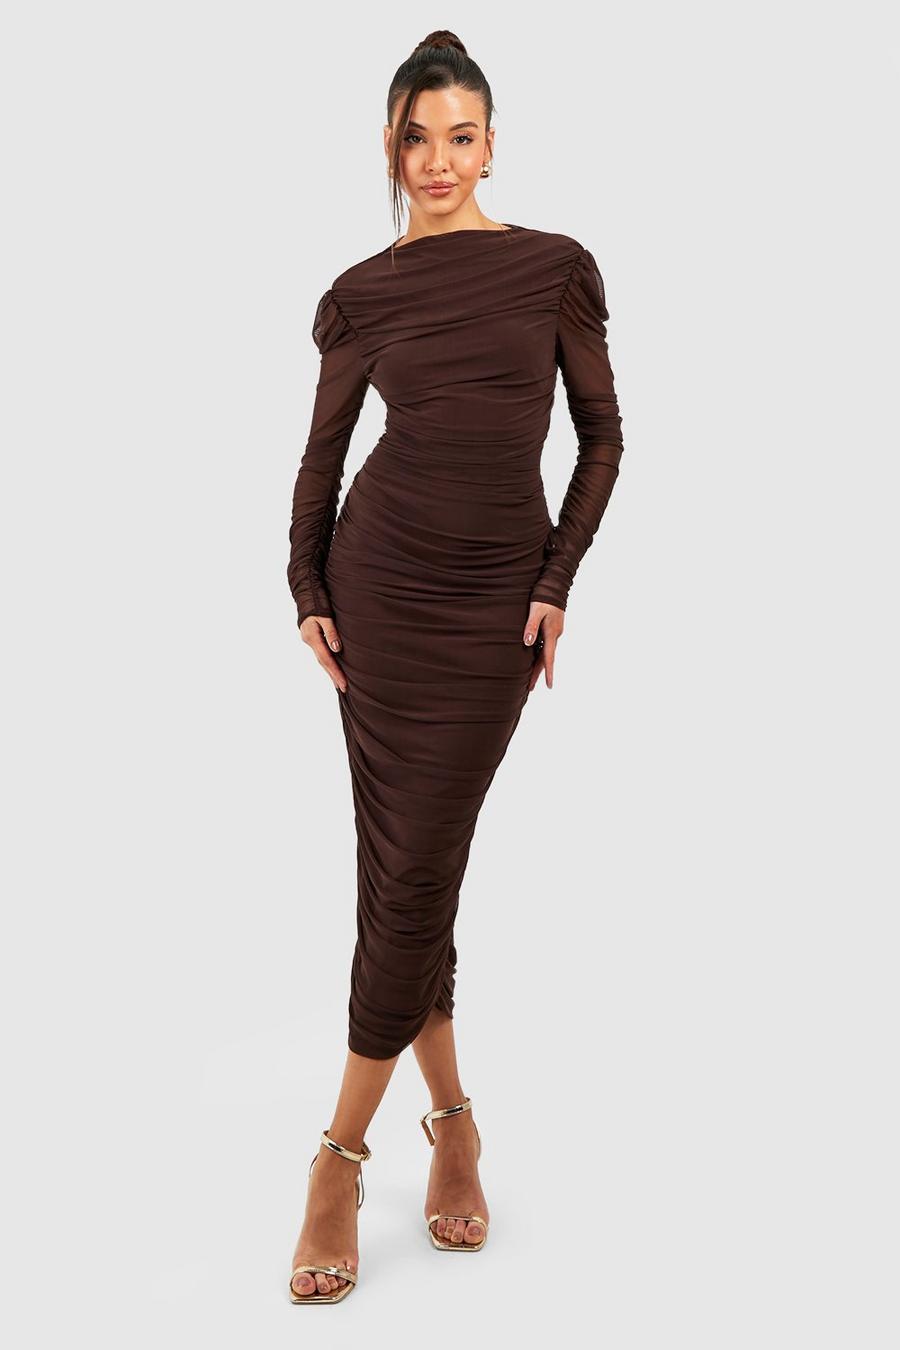 Chocolate Rouched Mesh High Neck Midaxi Dress